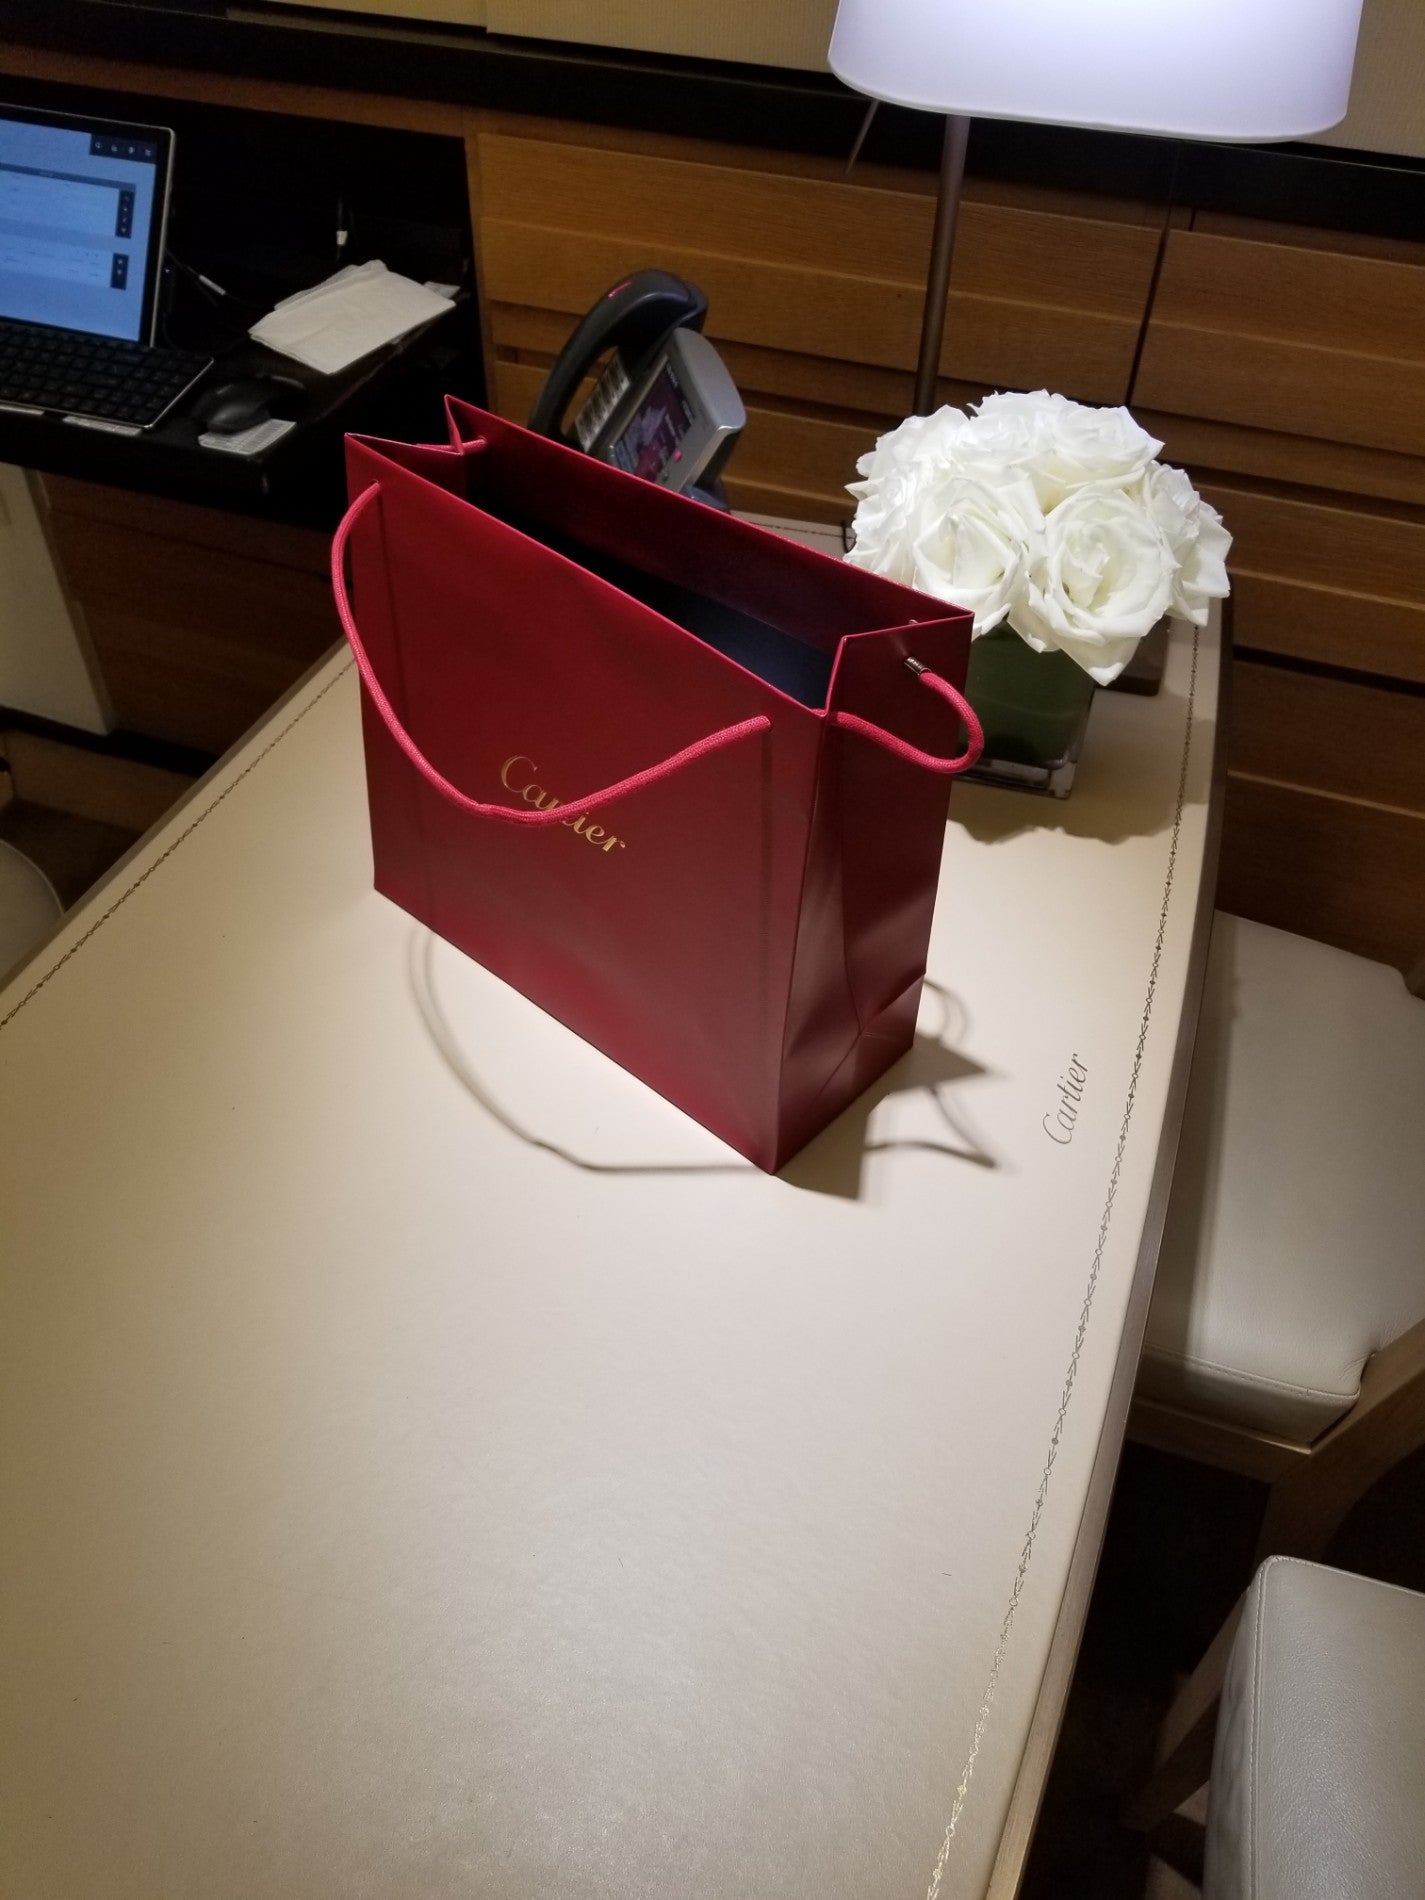 Cartier, 630 North Michigan Avenue, Chicago, IL, Gifts Specialty